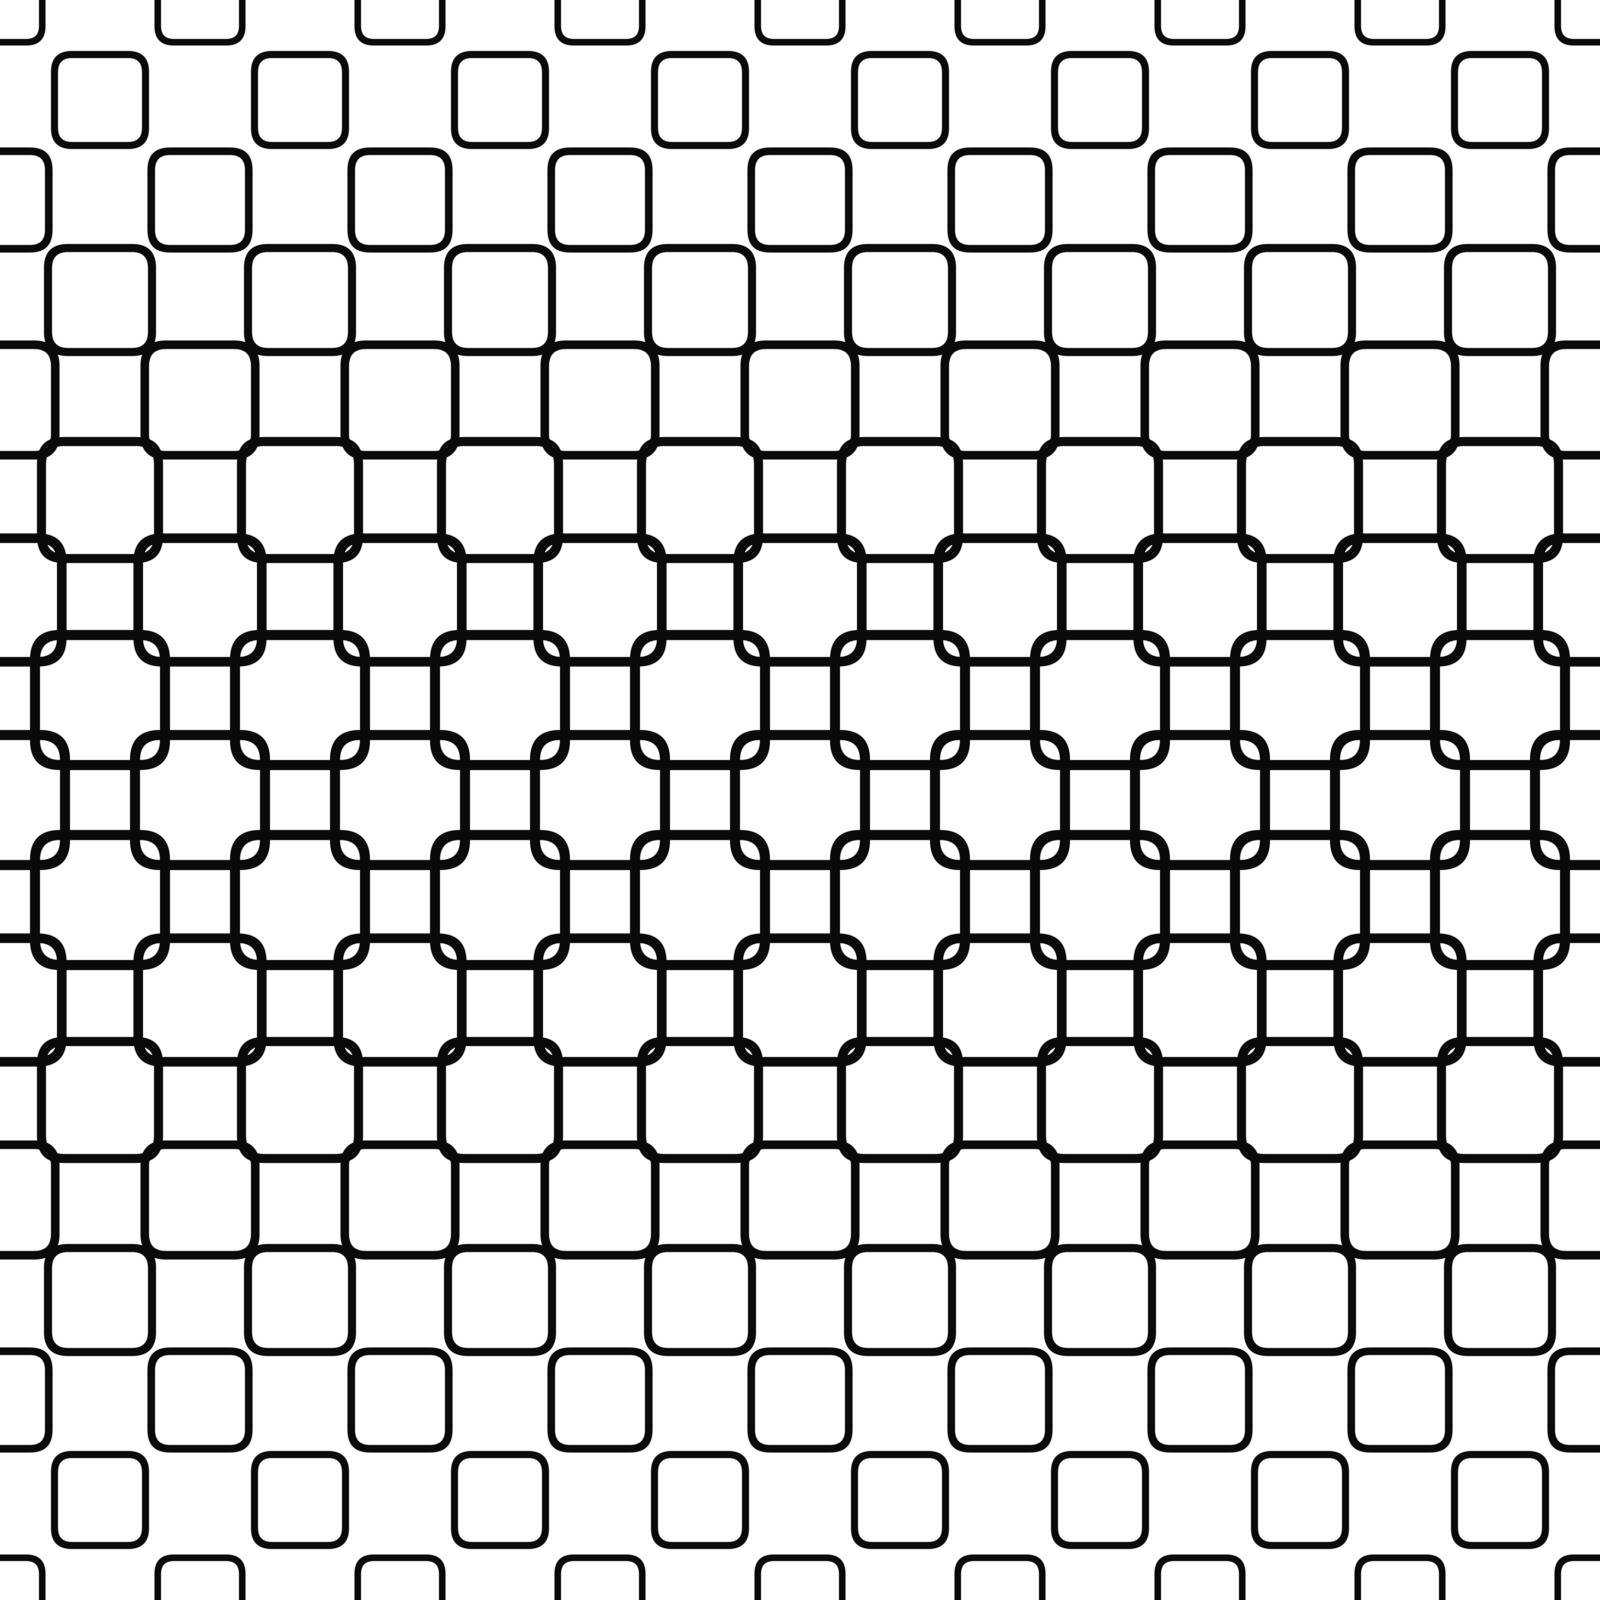 Repeating monochrome rounded square pattern design by davidzydd